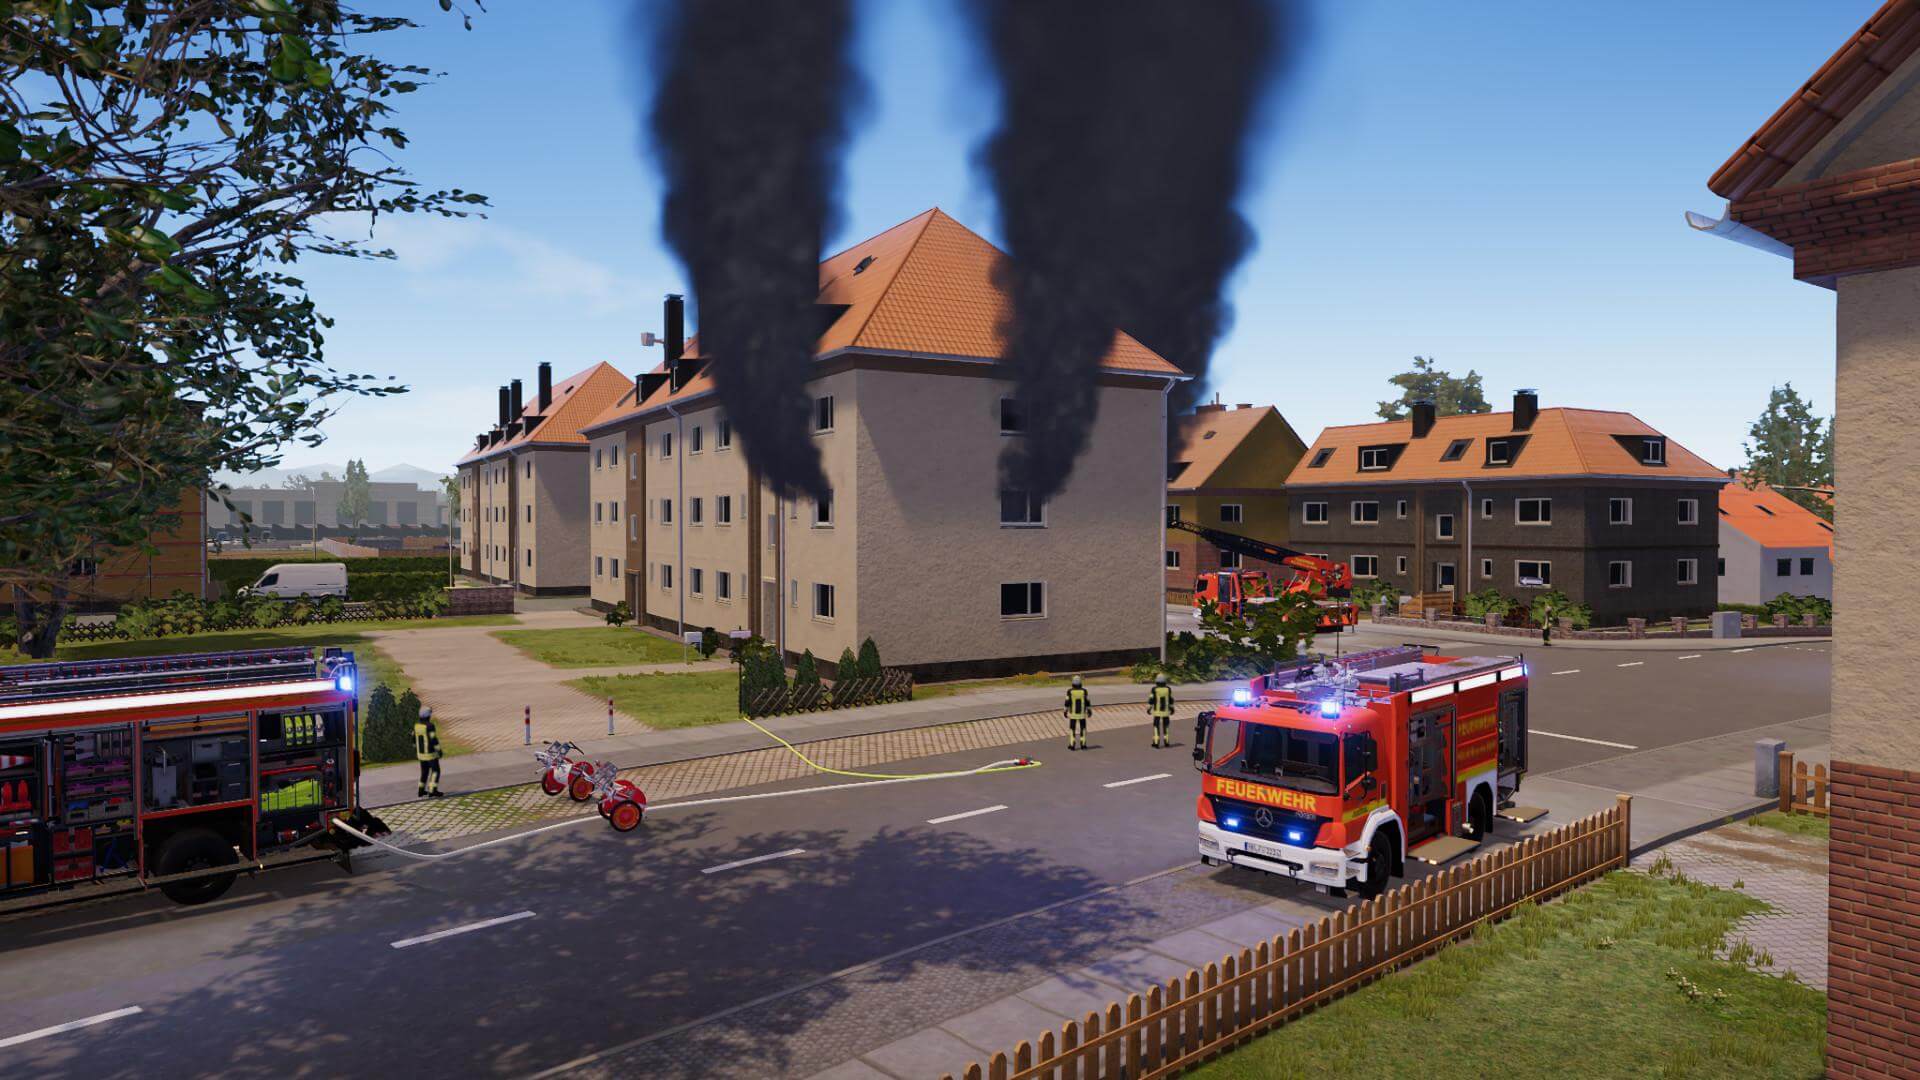 1616165703_emergency-call-112-the-fire-fighting-simulation-2-2.jpg